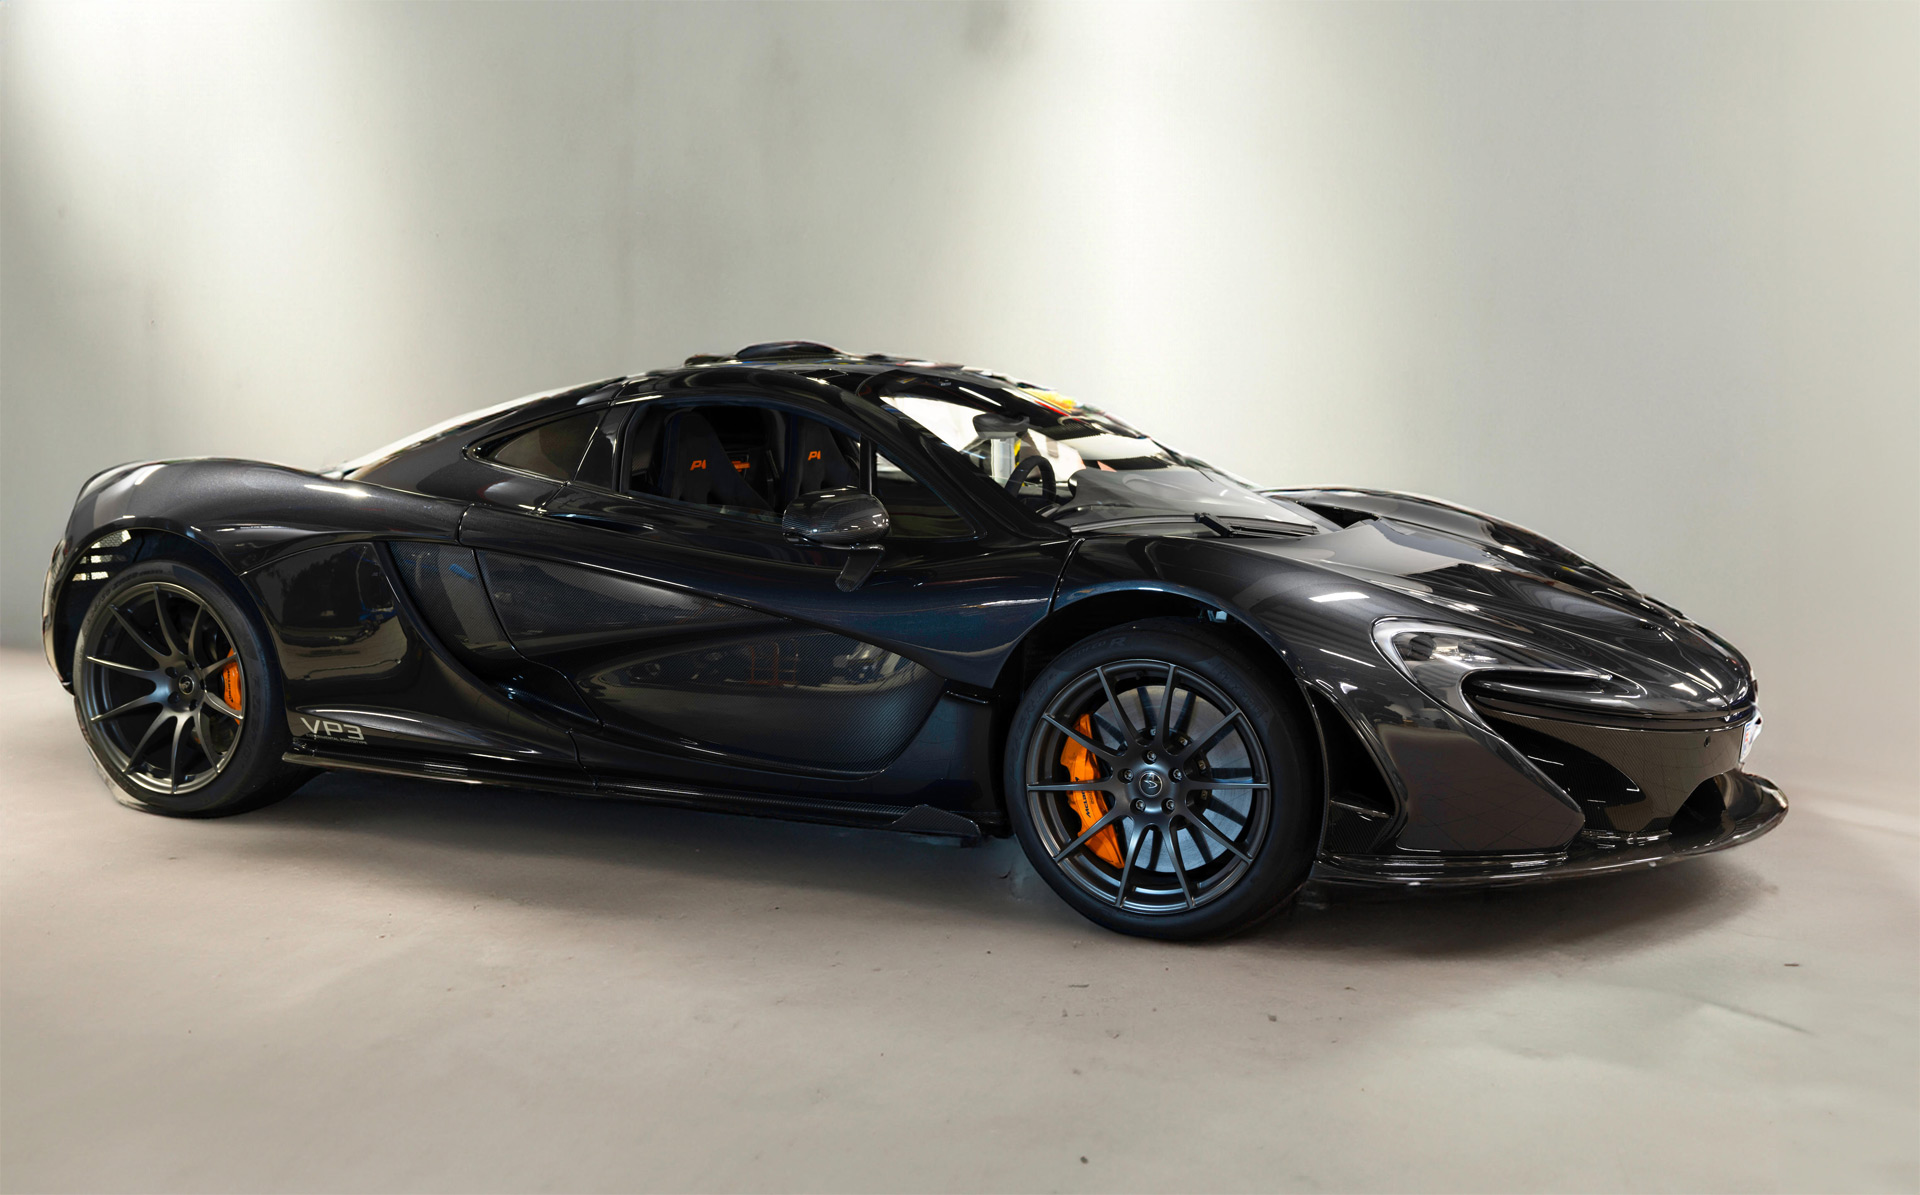 Purchase the McLaren P1 previously owned by double-F1 world champion Mika Häkkinen